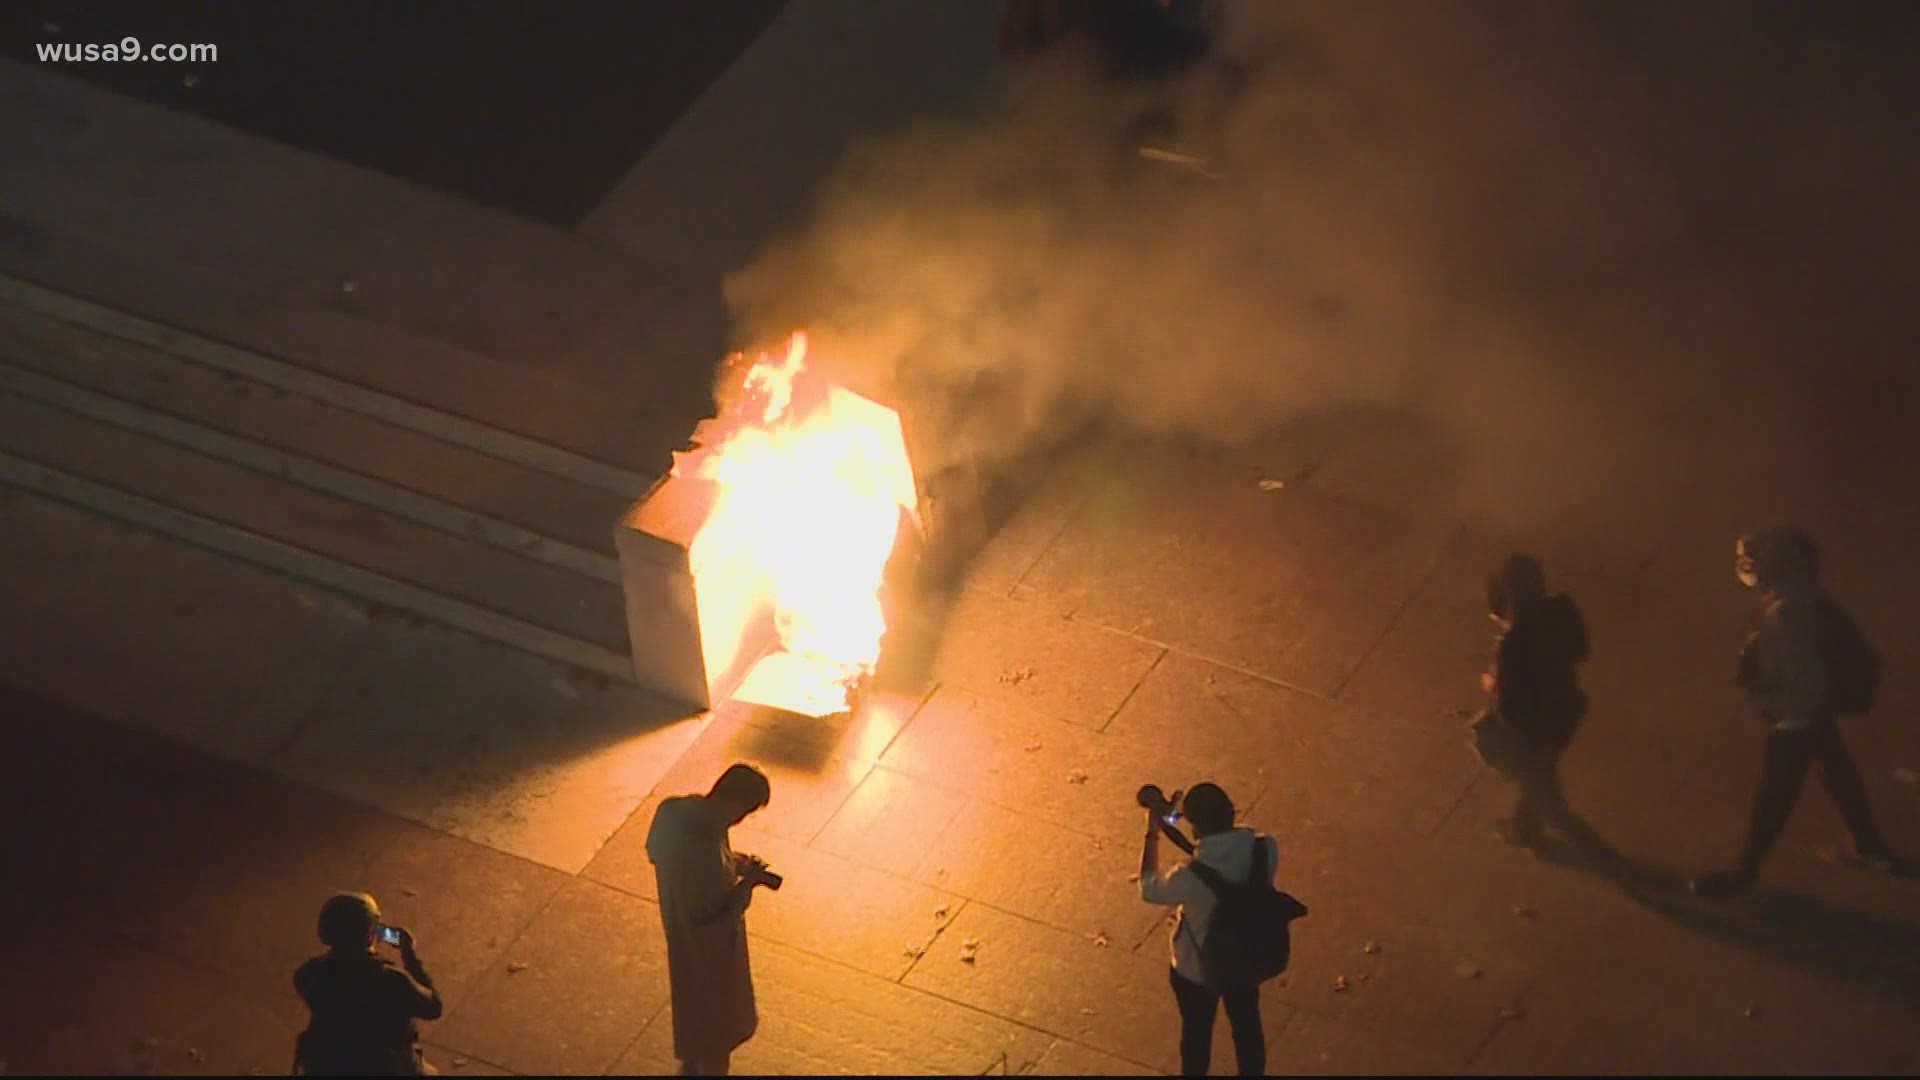 Amid clashes, flag burning and fireworks, one man was also stabbed.